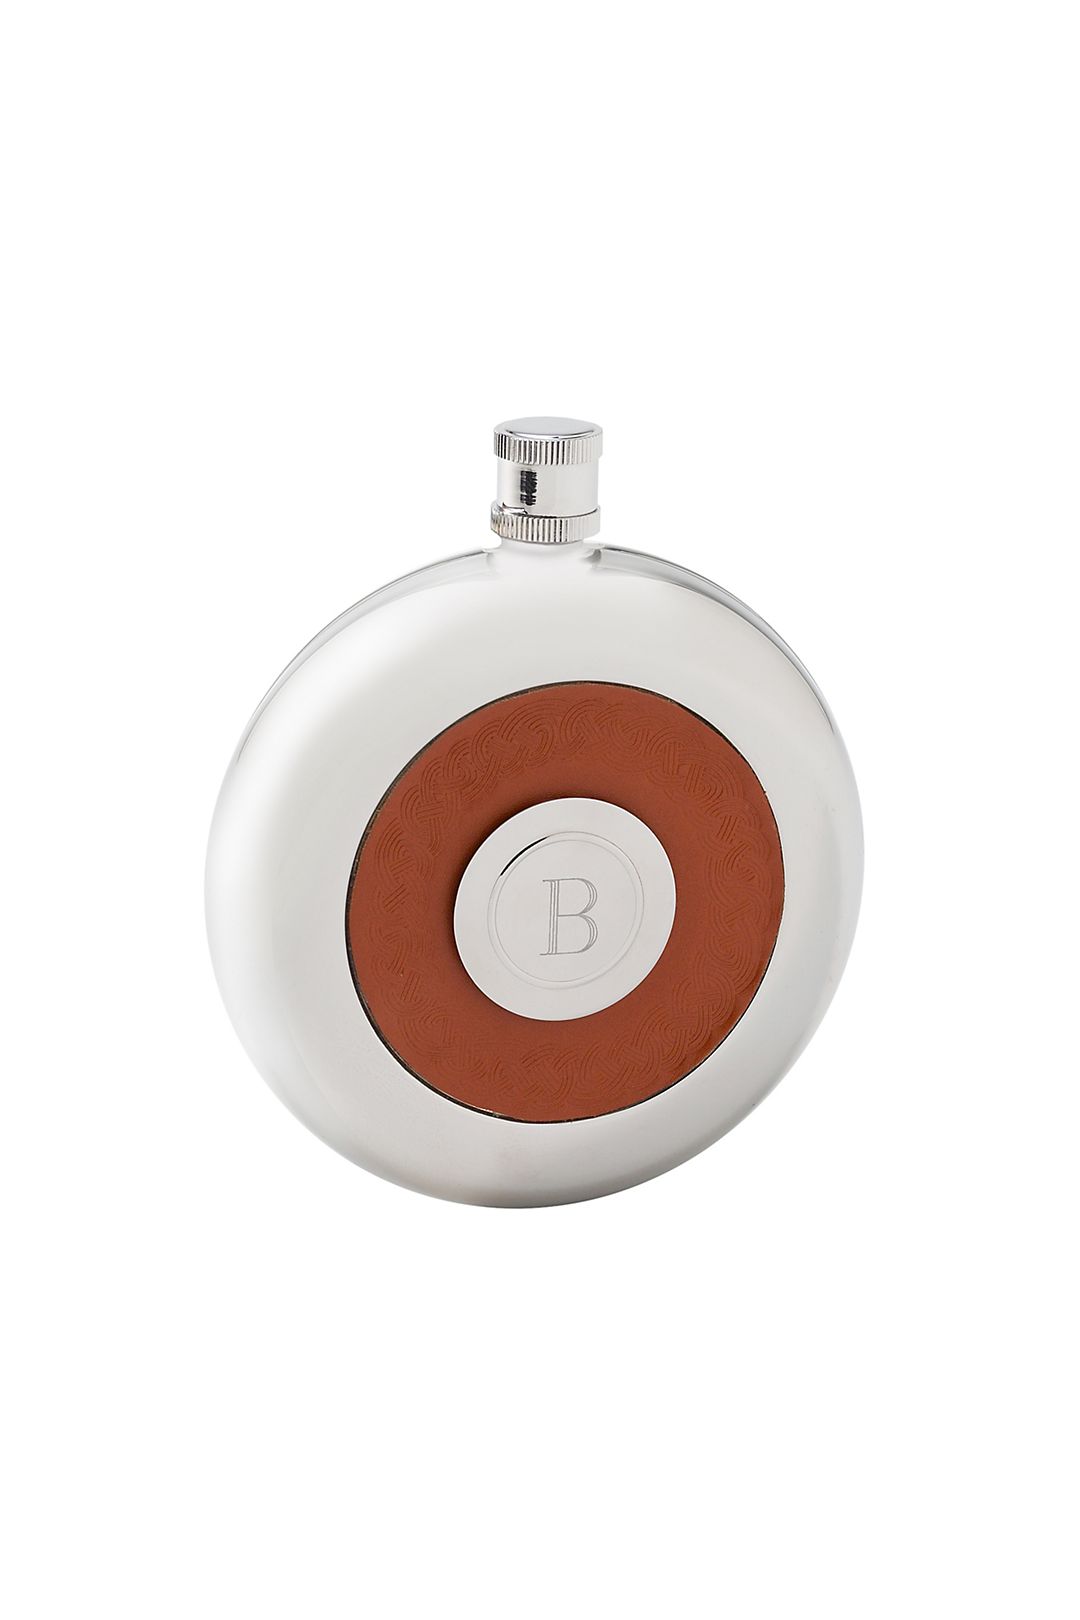 Personalized Oxford Round Leather Flask with Shot Image 1